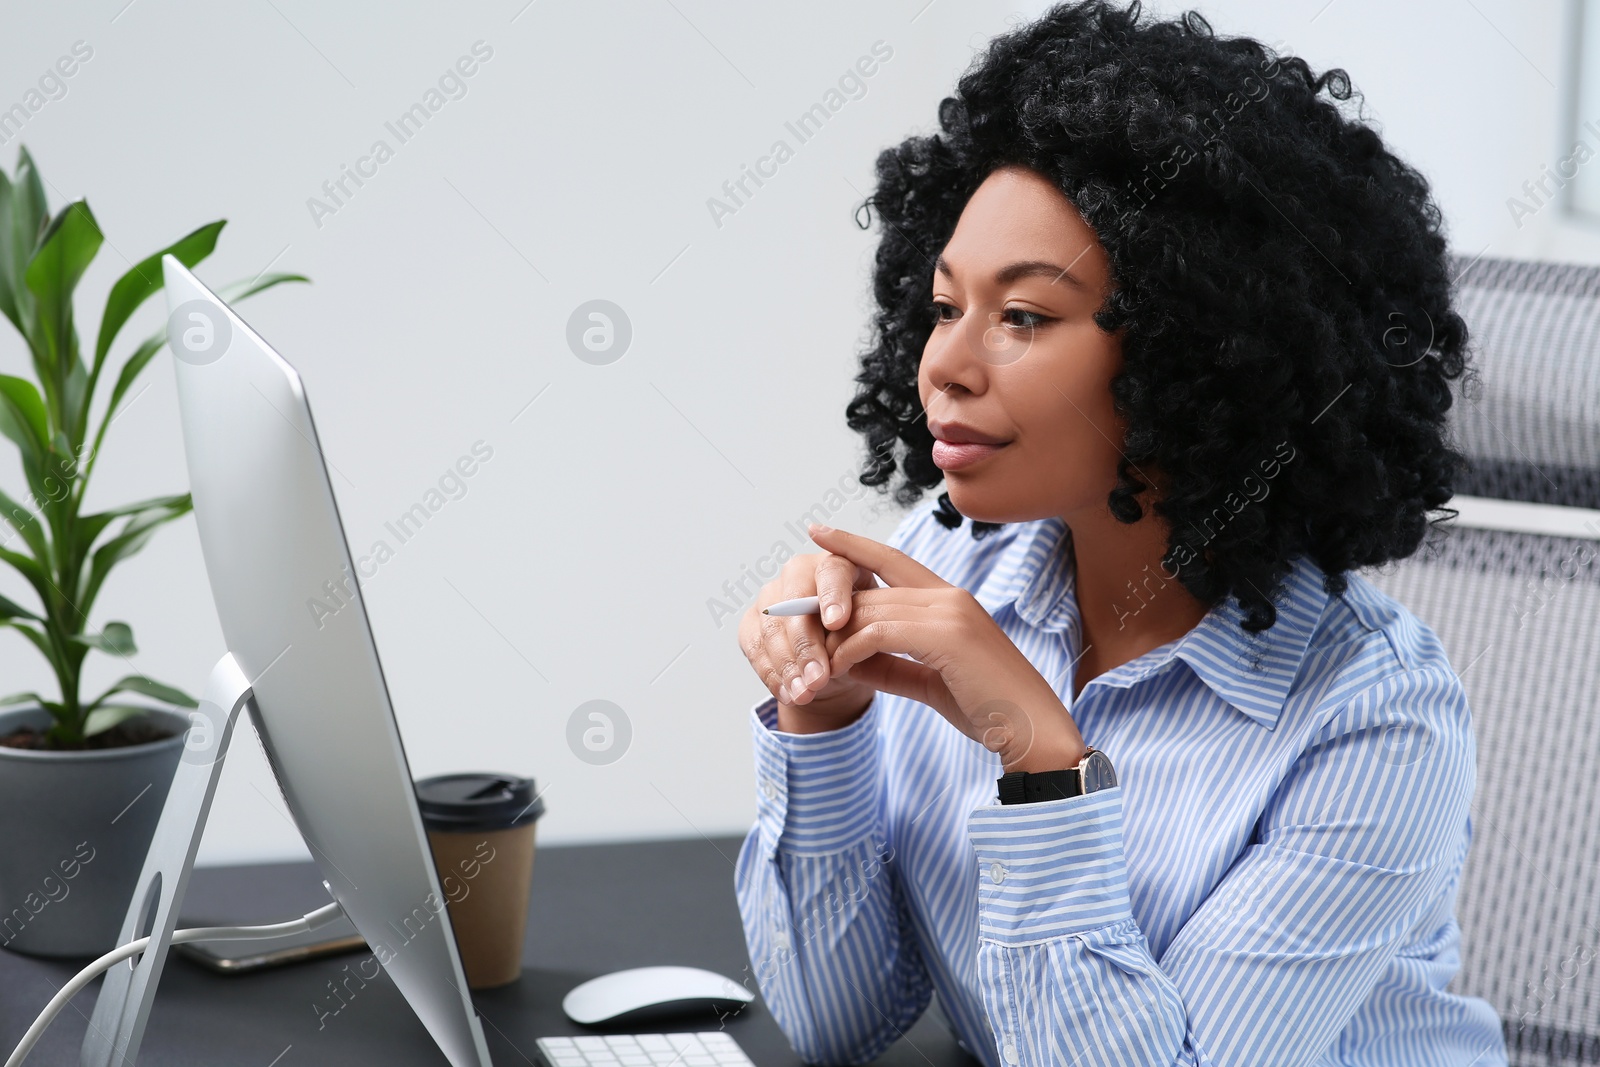 Photo of Young woman working on computer at table in office